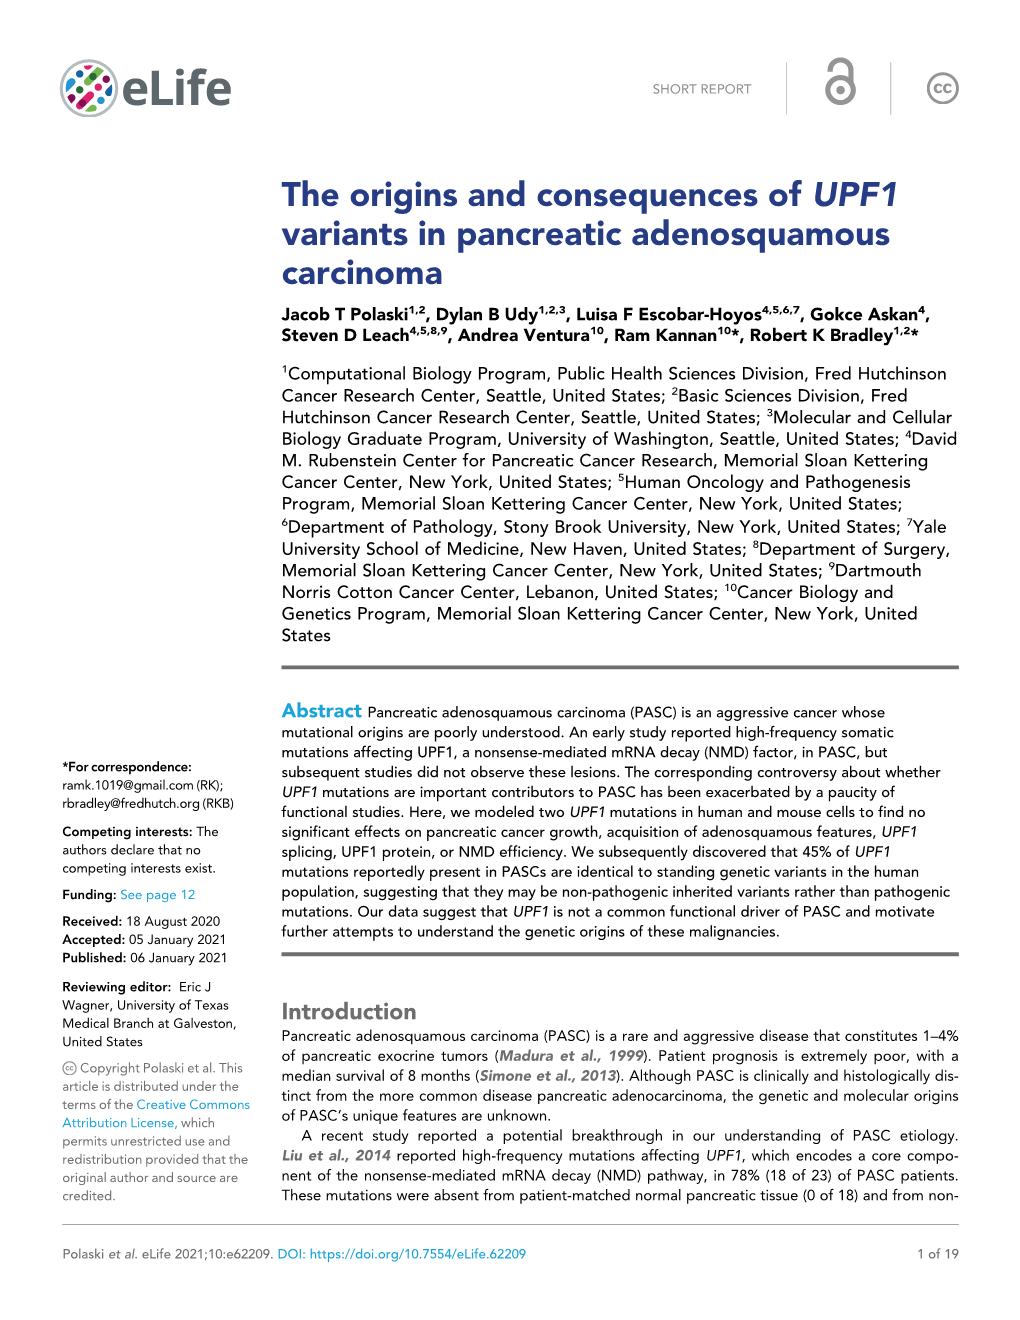 The Origins and Consequences of UPF1 Variants in Pancreatic